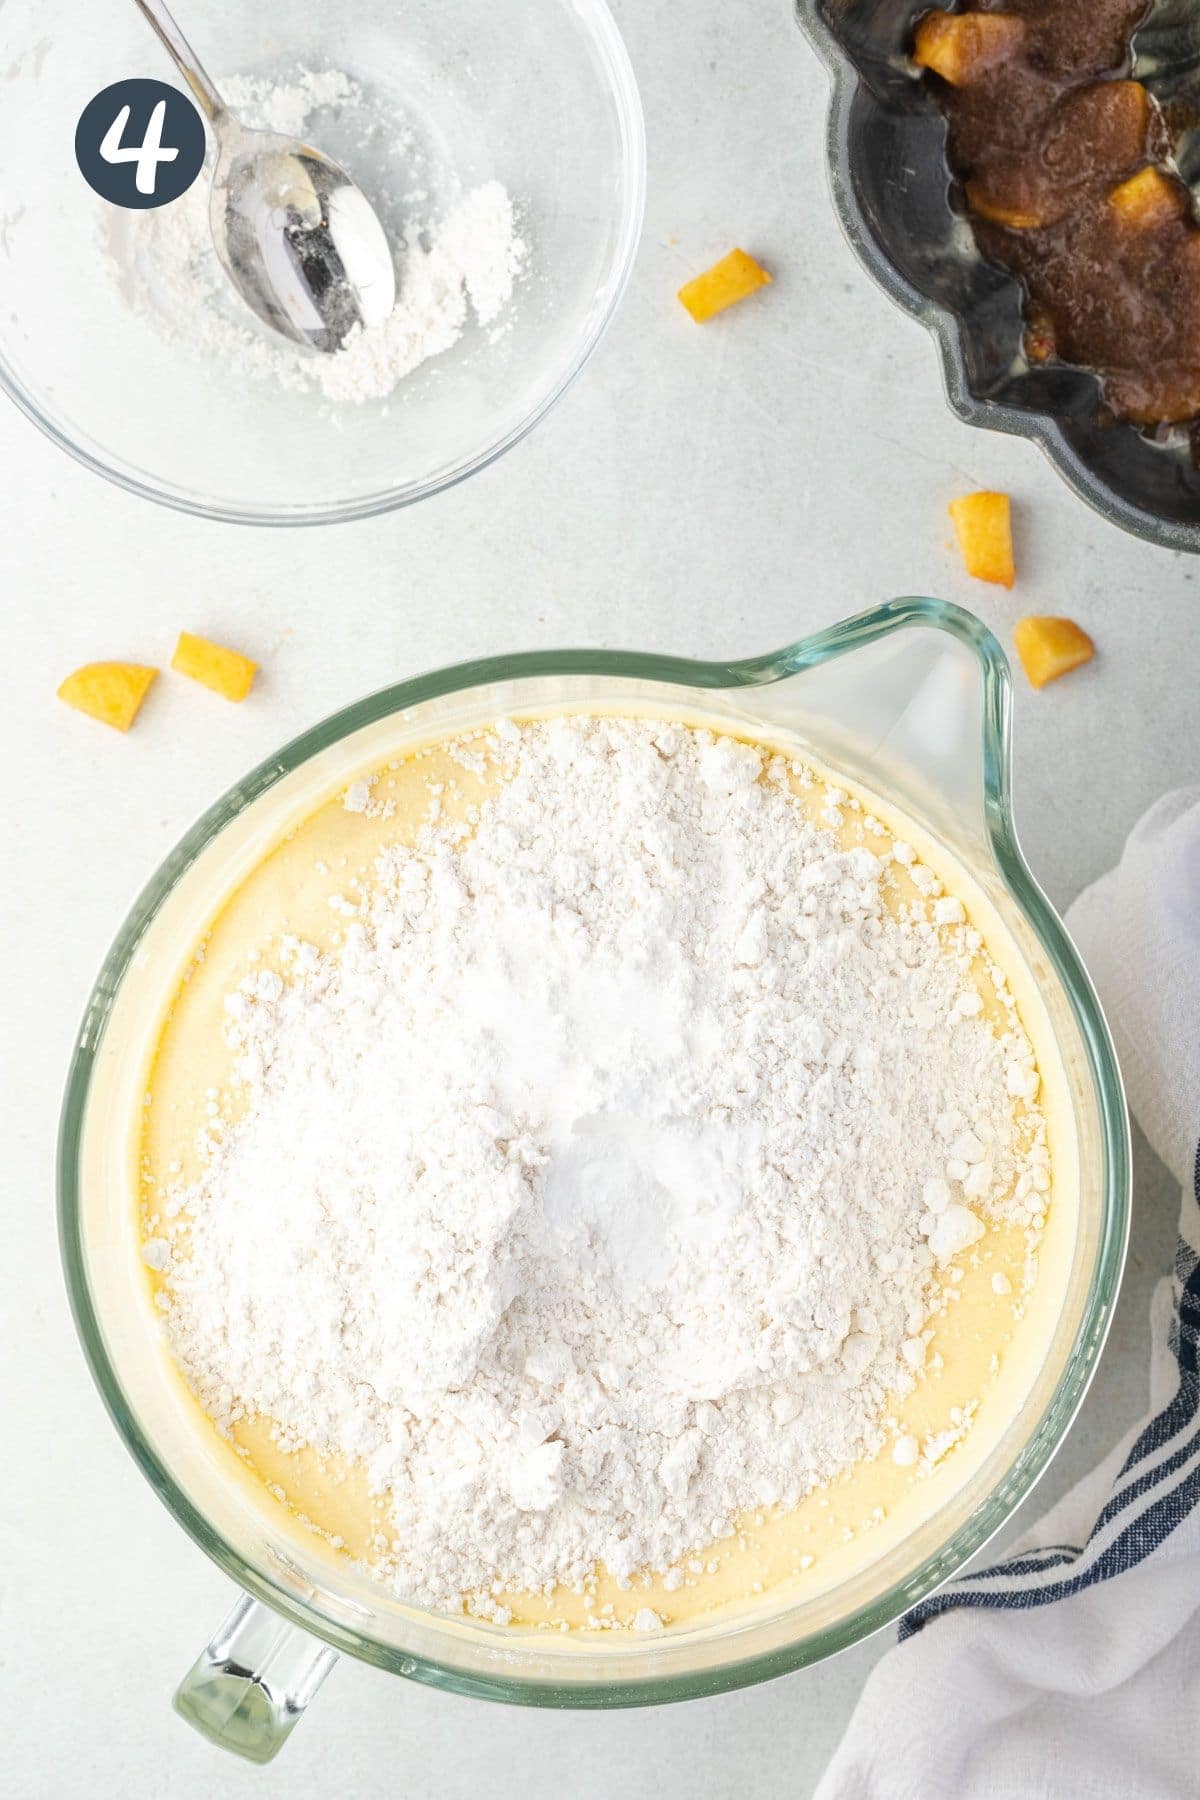 Flour on top of batter in large mixing bowl.